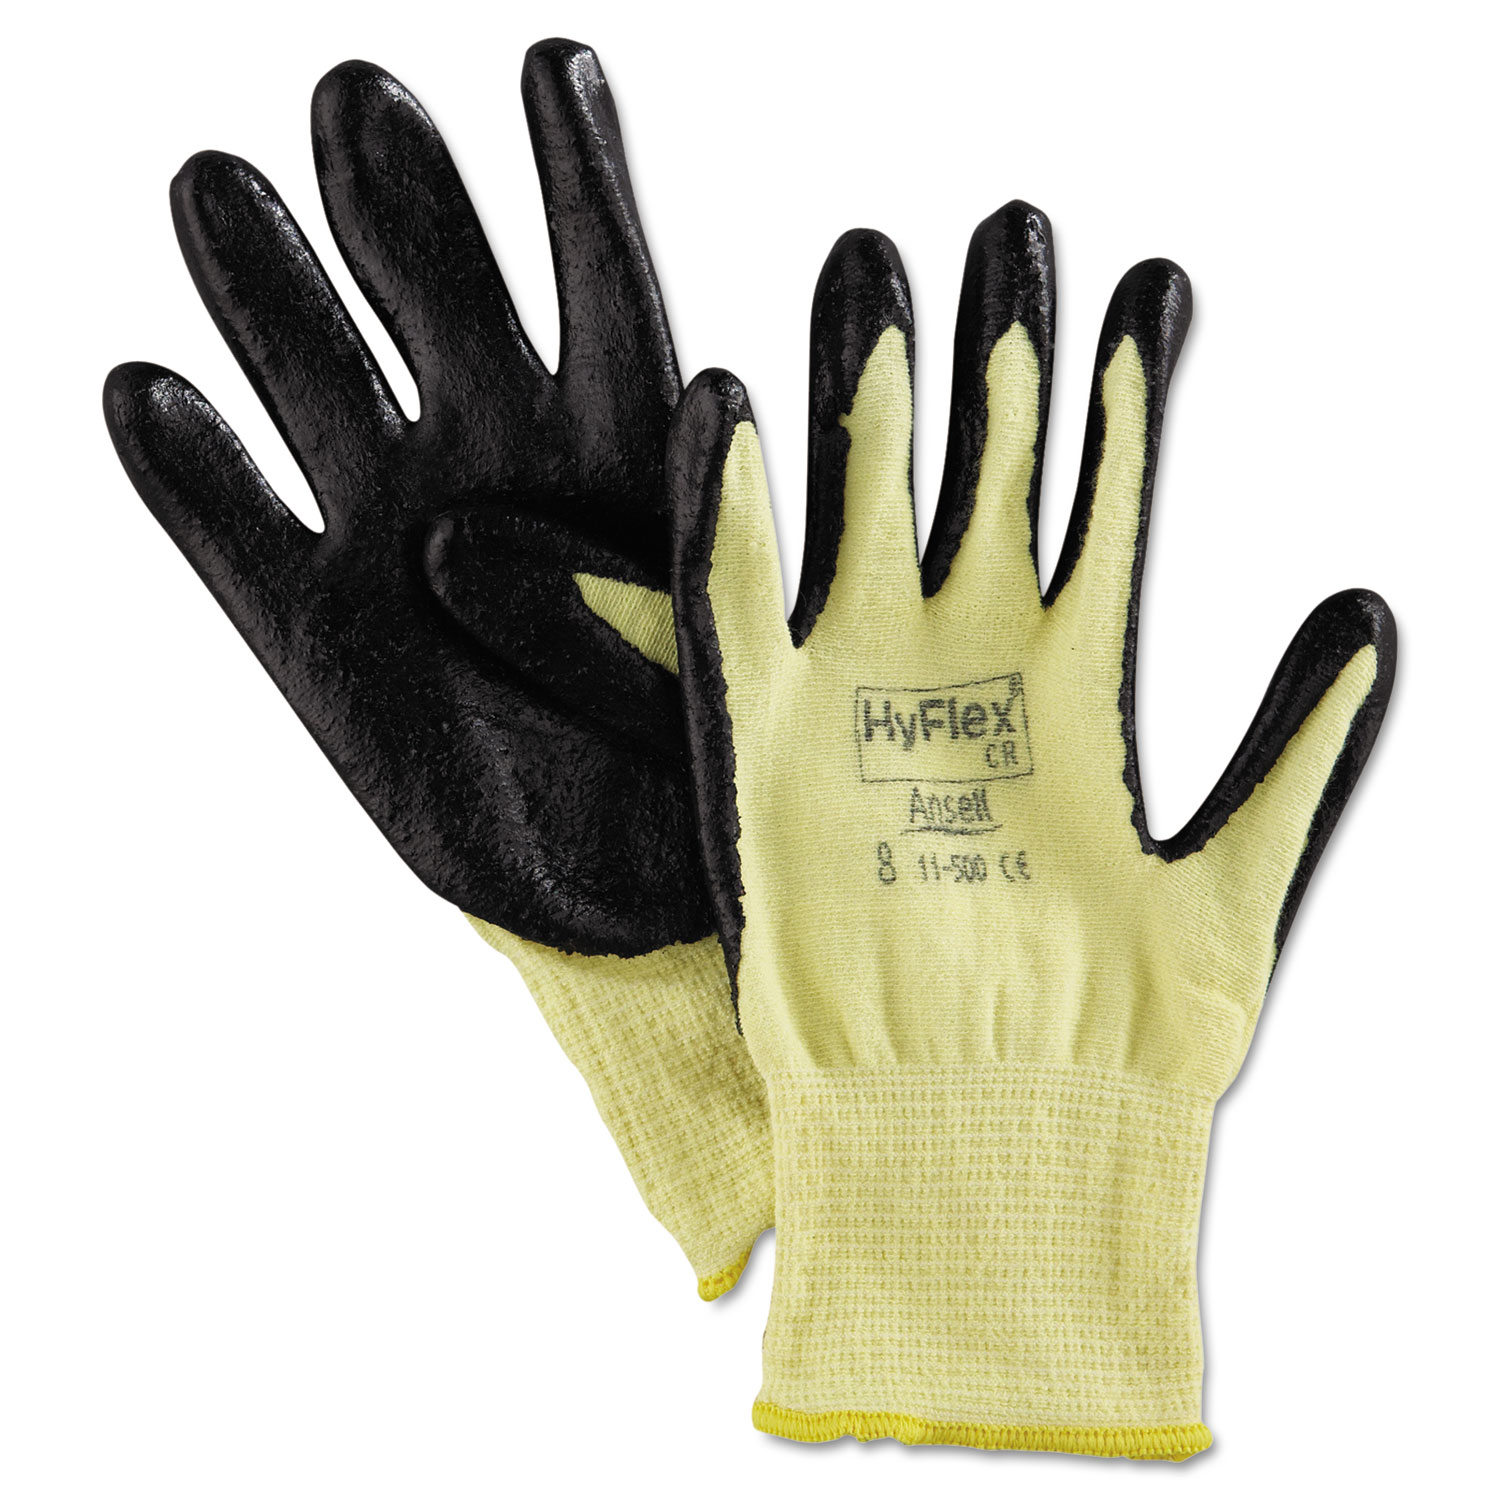  AnsellPro 103337 HyFlex 500 Light-Dty Gloves, Size 8, Kevlar/Nitrile, Yellow/Black, 12 Pairs (ANS115008) 